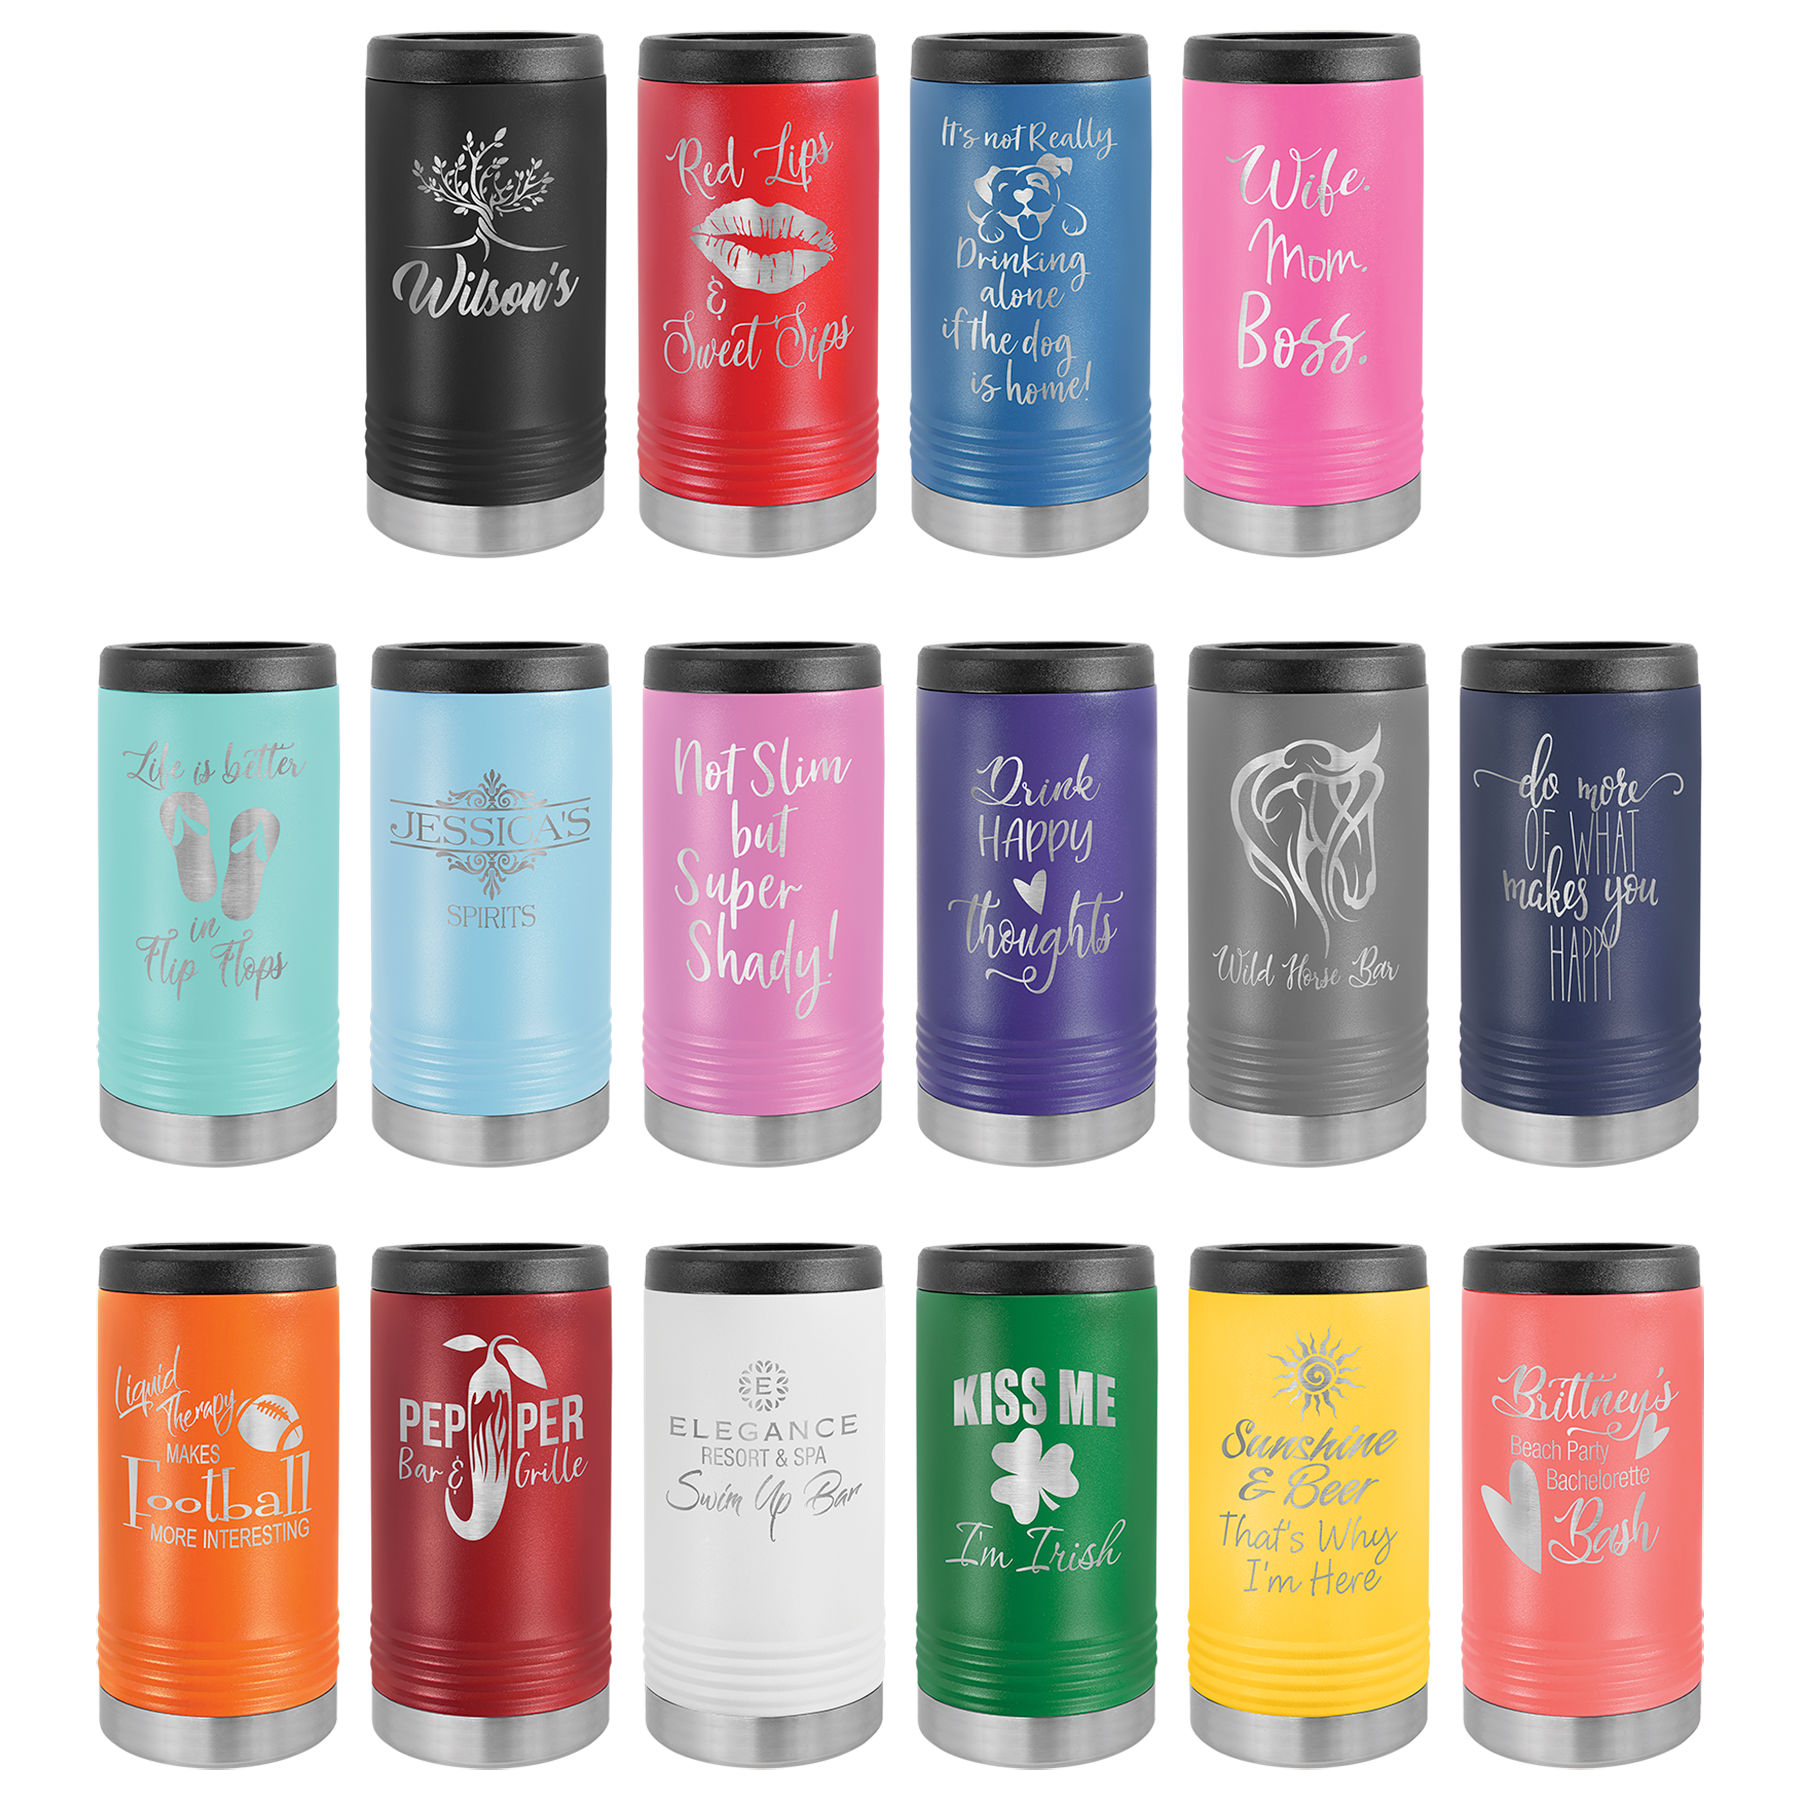 Buy 12oz Slim Laser Engraved Personalized on a Yeti Slim Can